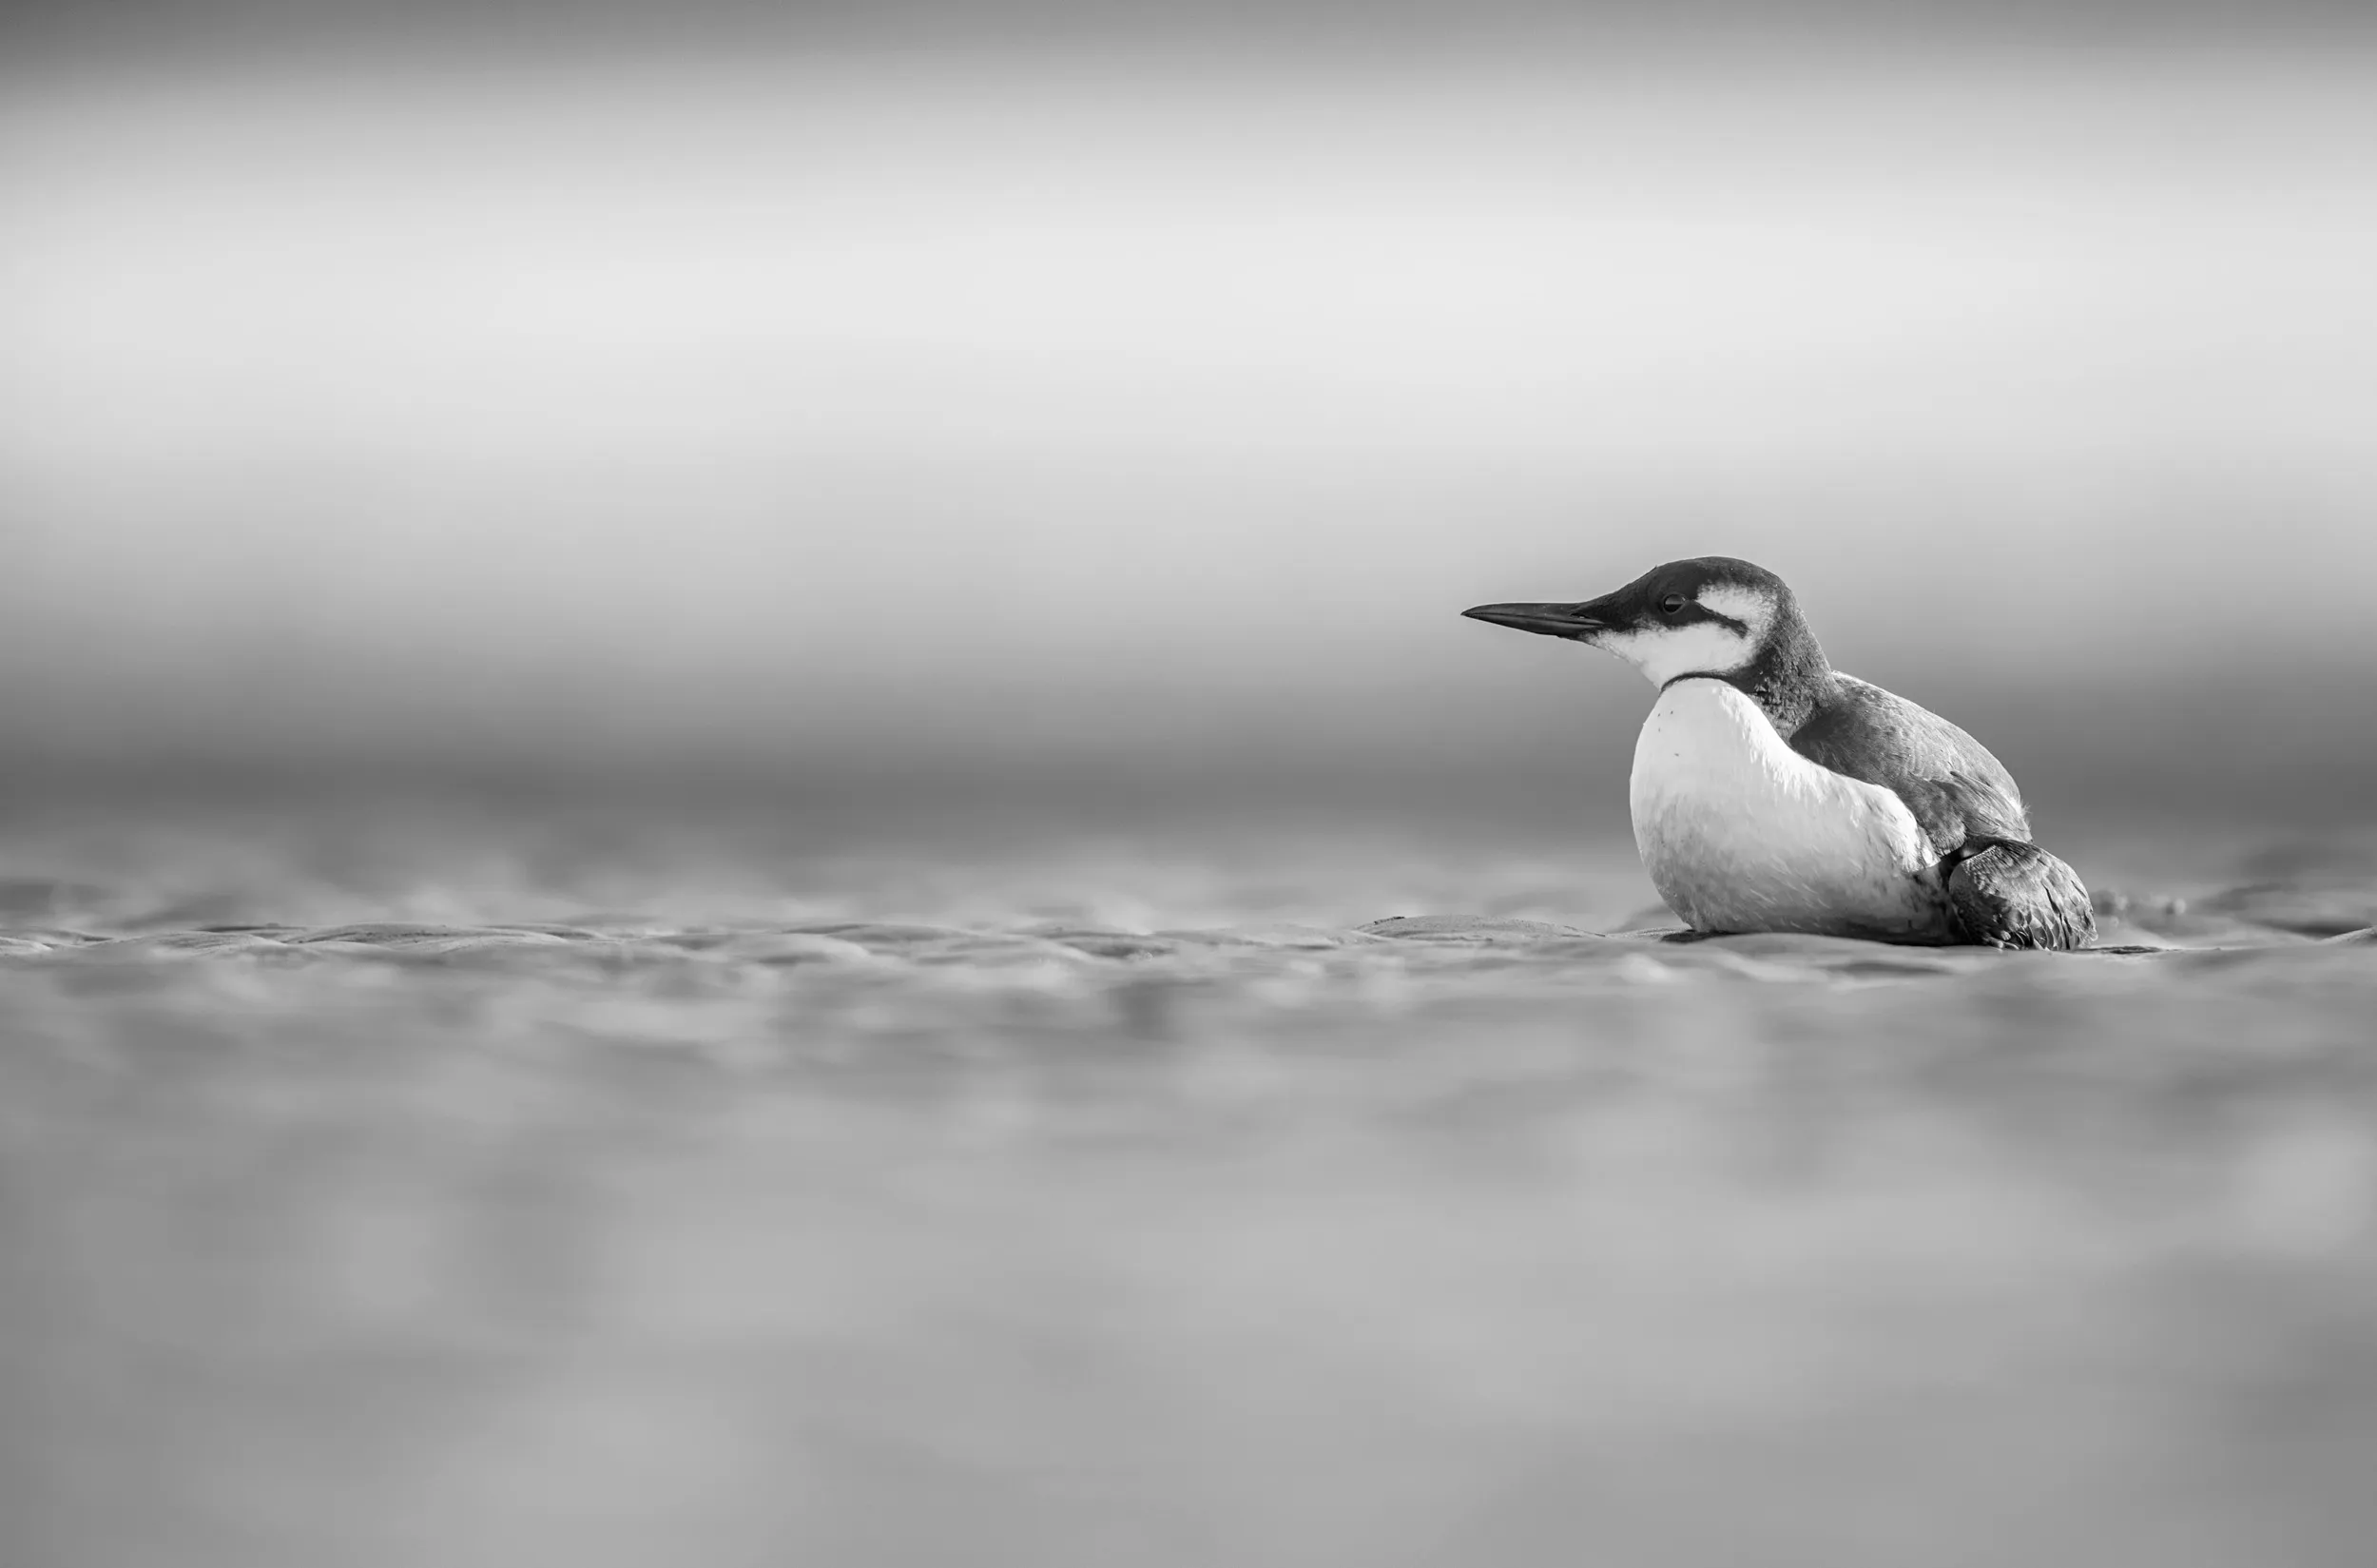 A lone juvenile Guillemot sat on a beach looking weak and possibly injured.